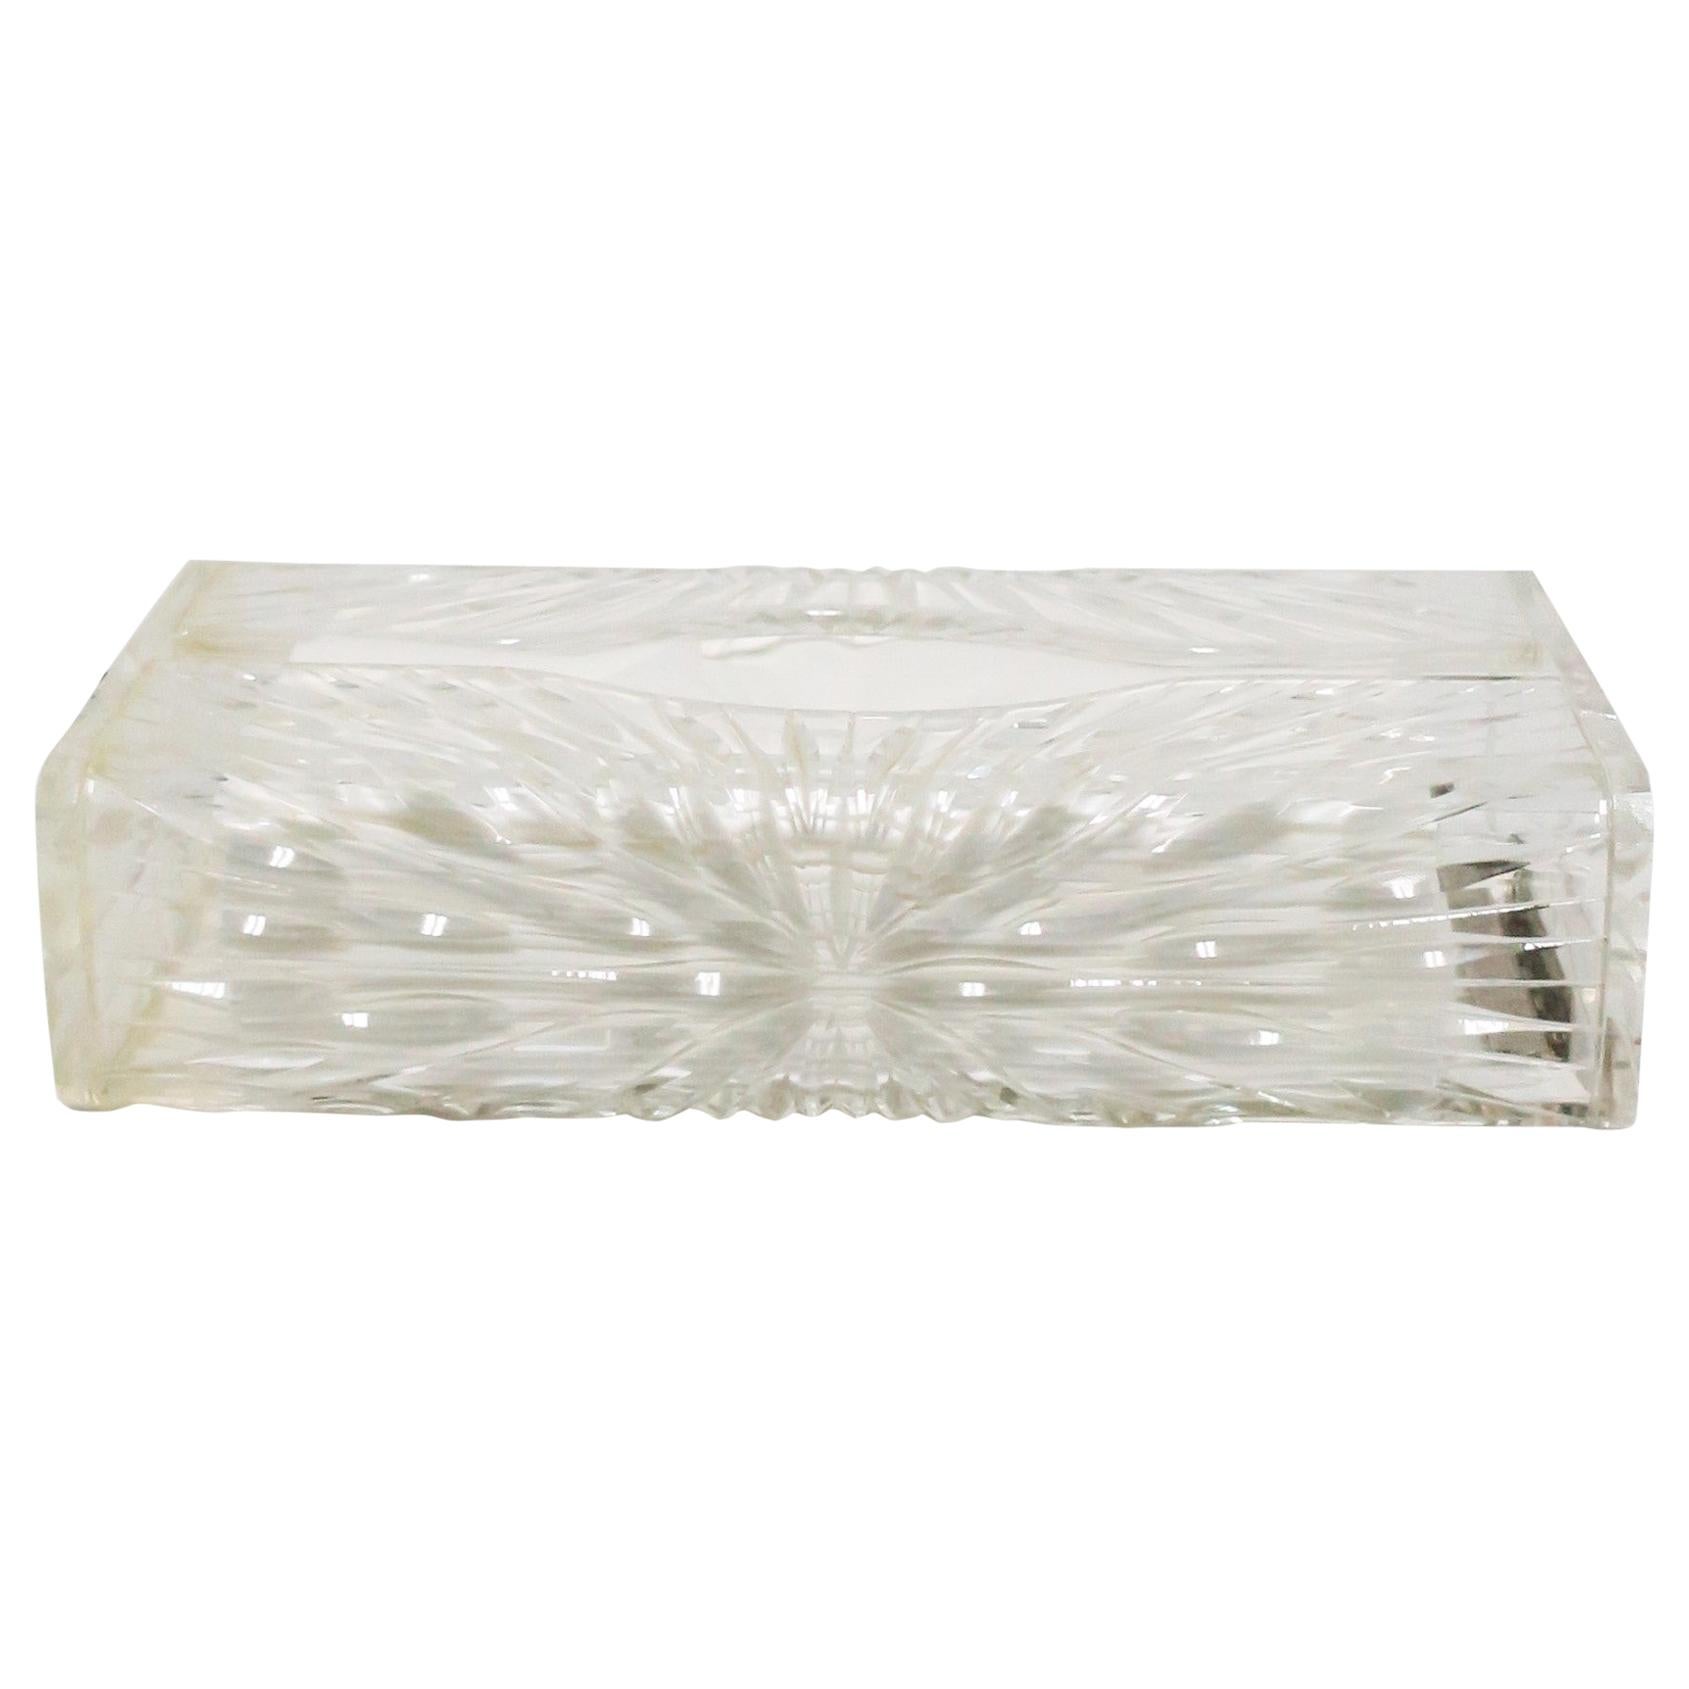 Lucite Tissue Box Cover Holder by Wilardy For Sale